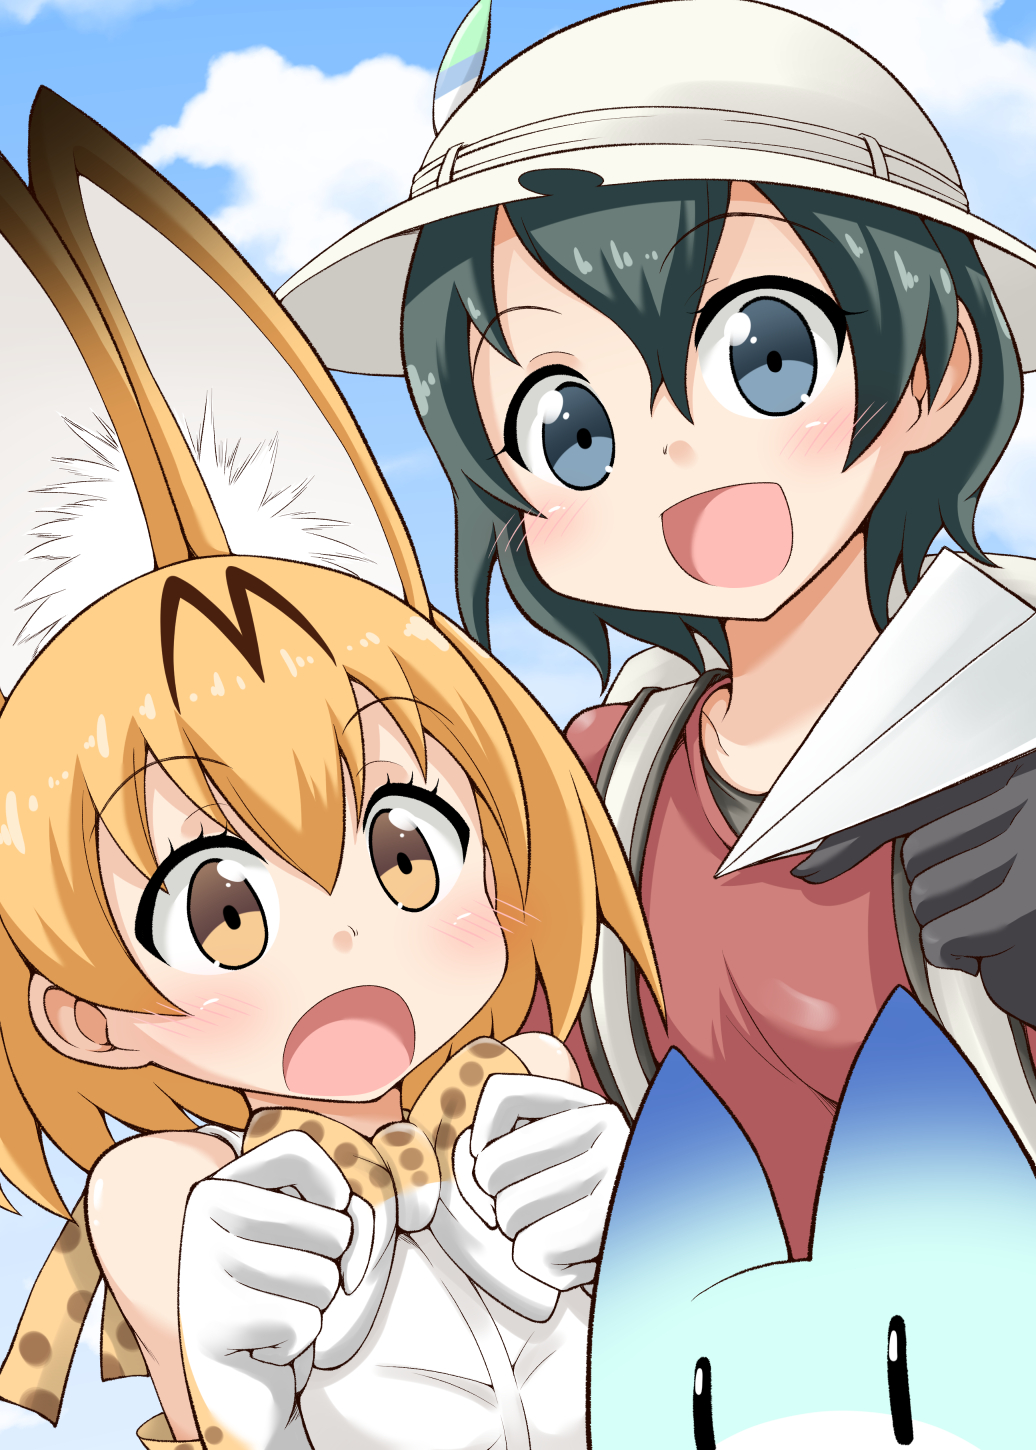 2girls animal_ears black_hair blonde_hair blue_eyes blue_sky bow bowtie bucket_hat clenched_hand clouds commentary_request elbow_gloves gloves hair_between_eyes hat hat_feather highres kaban kemono_friends looking_at_viewer lucky_beast_(kemono_friends) multiple_girls open_mouth red_shirt serval_(kemono_friends) serval_ears serval_print shirt short_sleeves sky sleeveless sleeveless_shirt smile surprised t-shirt upper_body white_shirt yamato_nadeshiko yellow_eyes